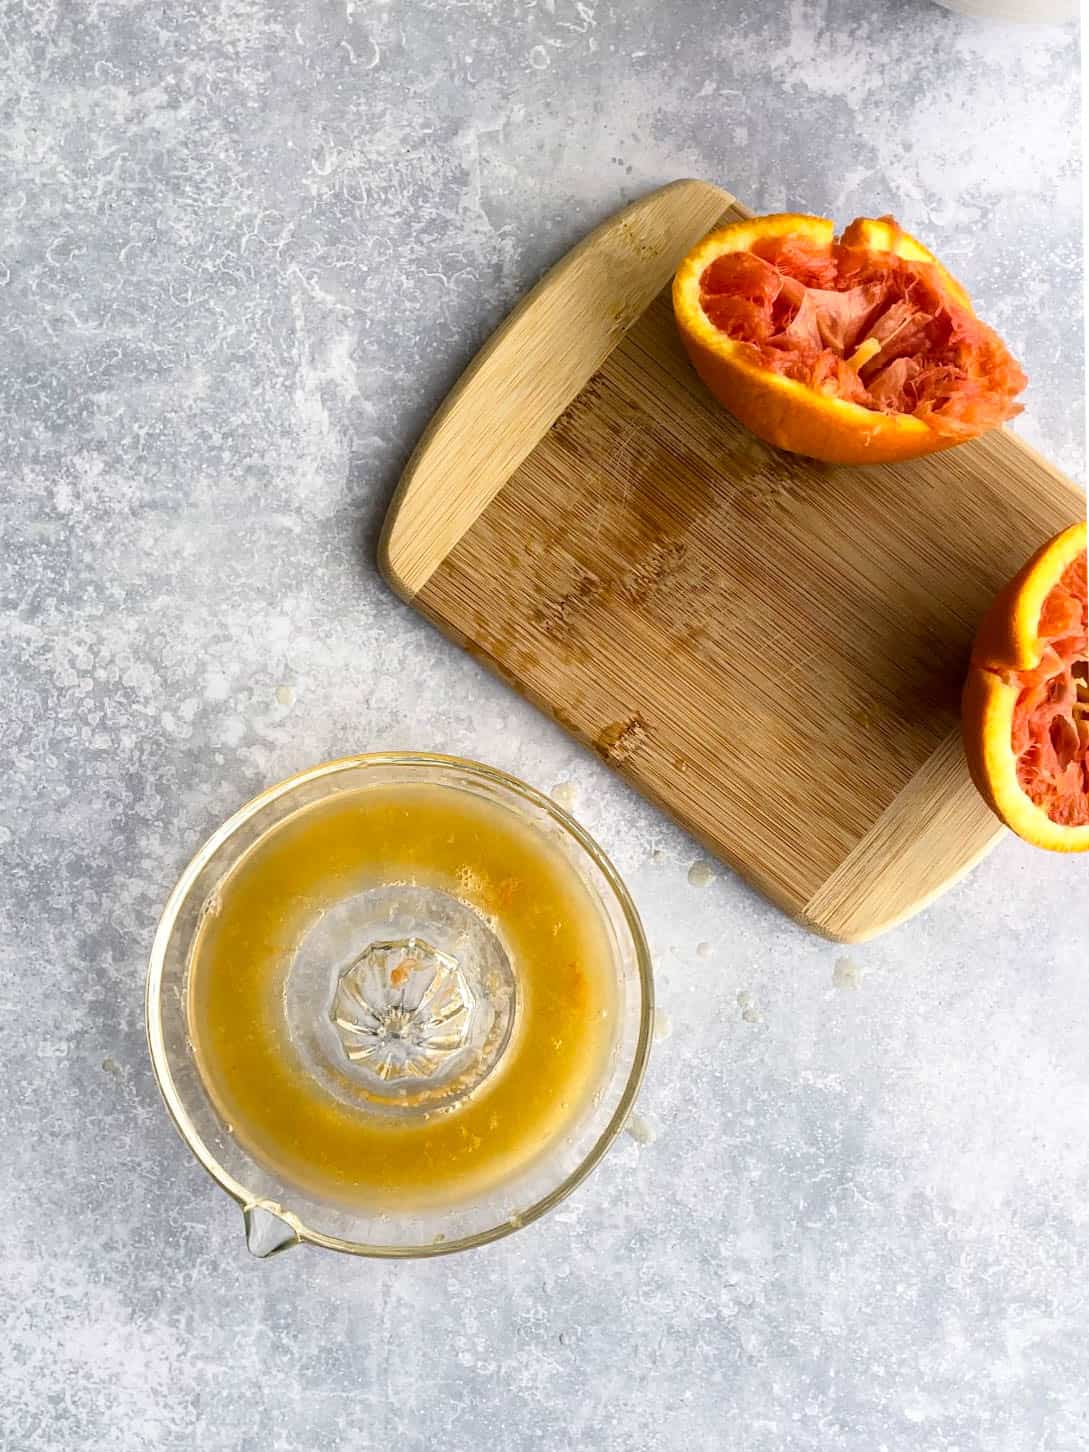 freshly squeezed oranges sit on a countertop.